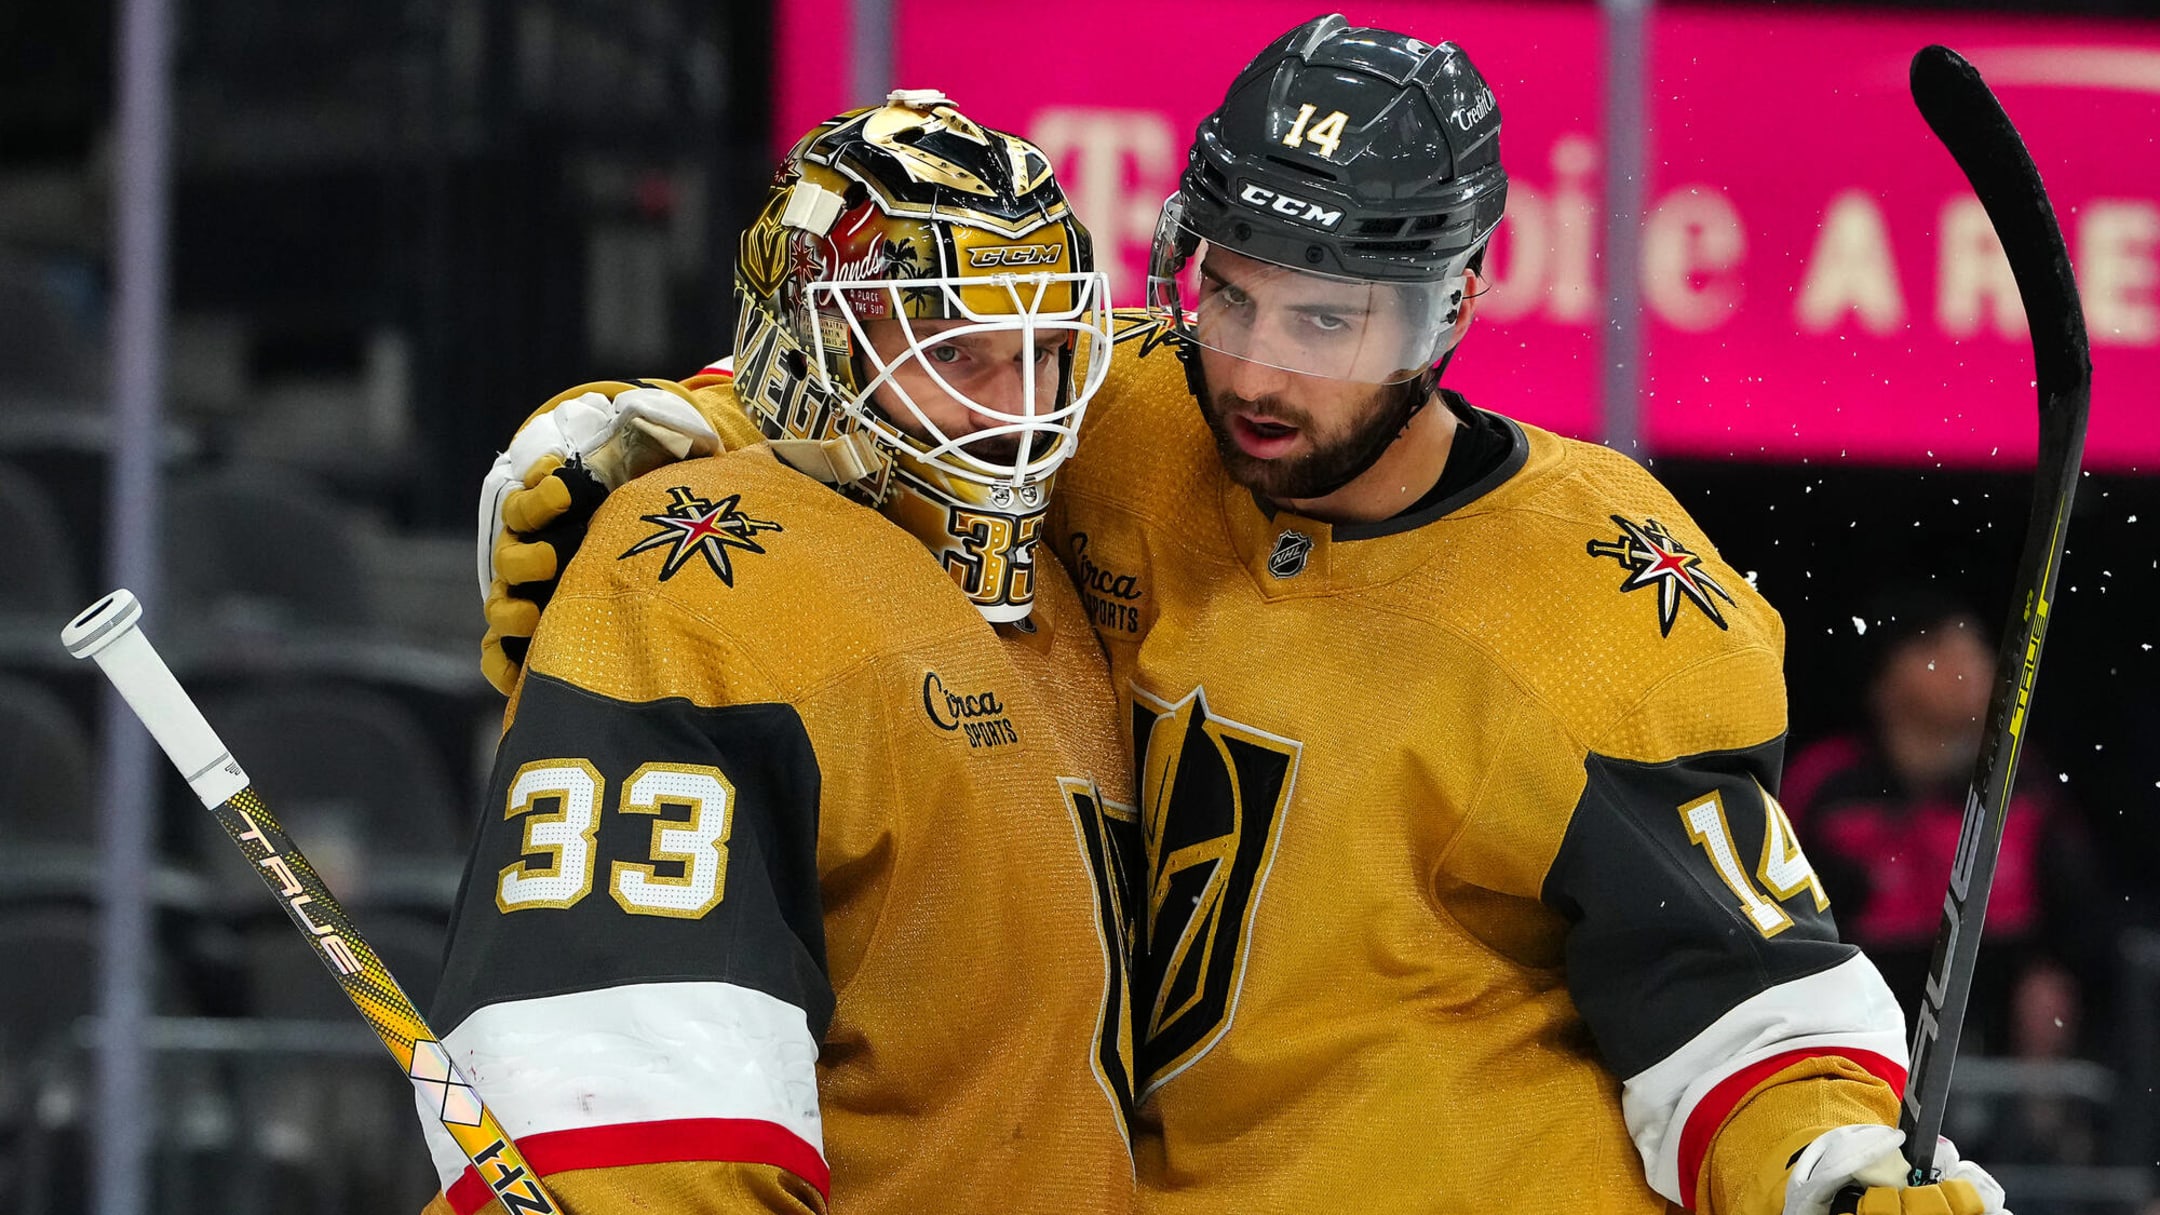 NHL's Vegas Golden Knights and Seattle Kraken Opening Night - Quince Imaging